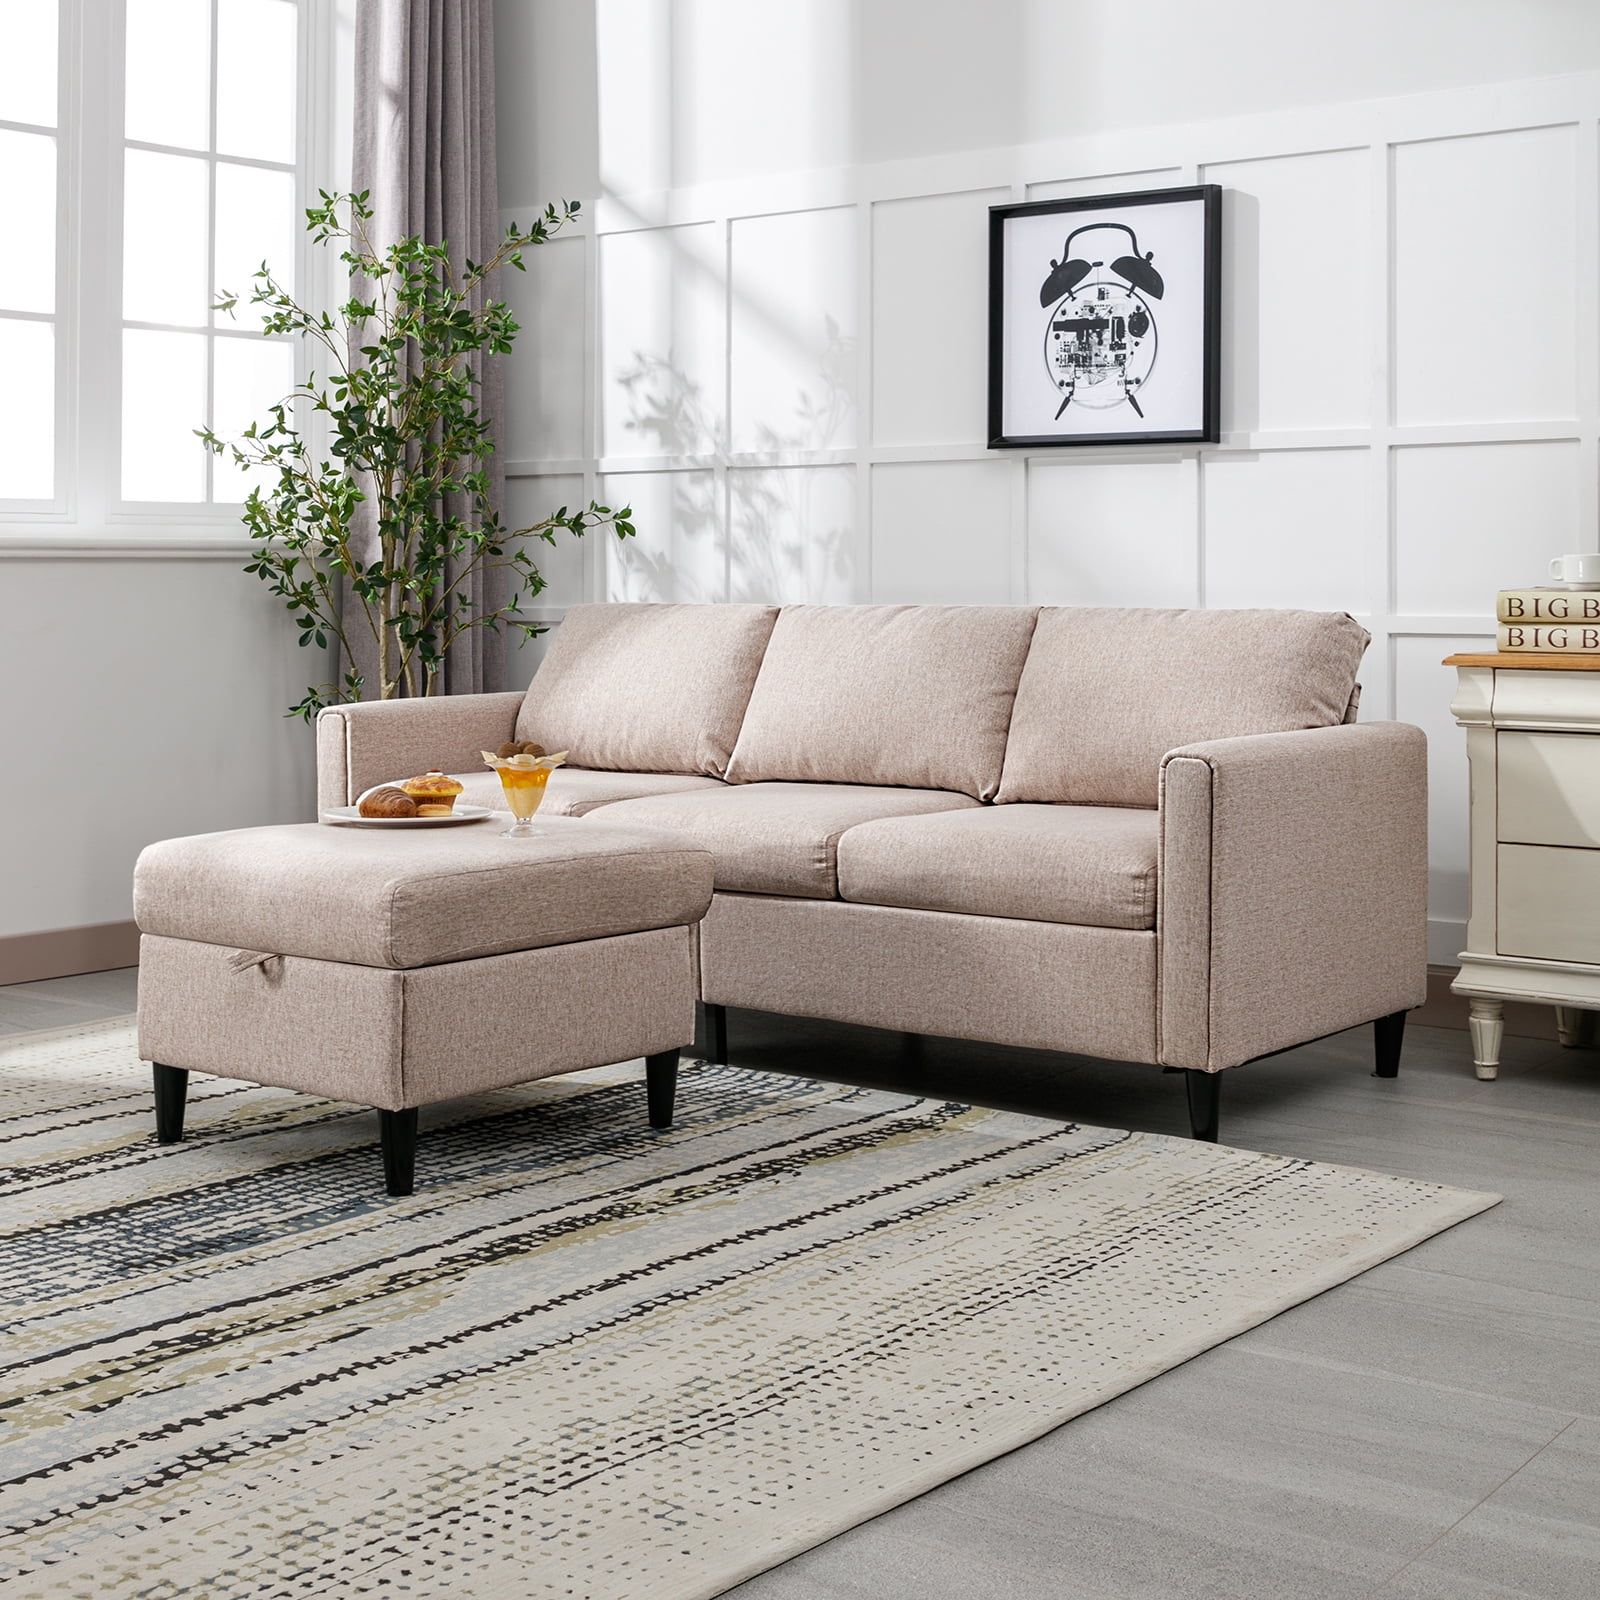 Zafly Convertible Sectional Sofa Couch, 3 Seat Upholstered Sofa With  Flexible Storage Ottoman Chaise, Modern Modular L Shape Couches For Living  Room/Office – Beige – Walmart With Regard To 3 Seat Convertible Sectional Sofas (View 3 of 15)